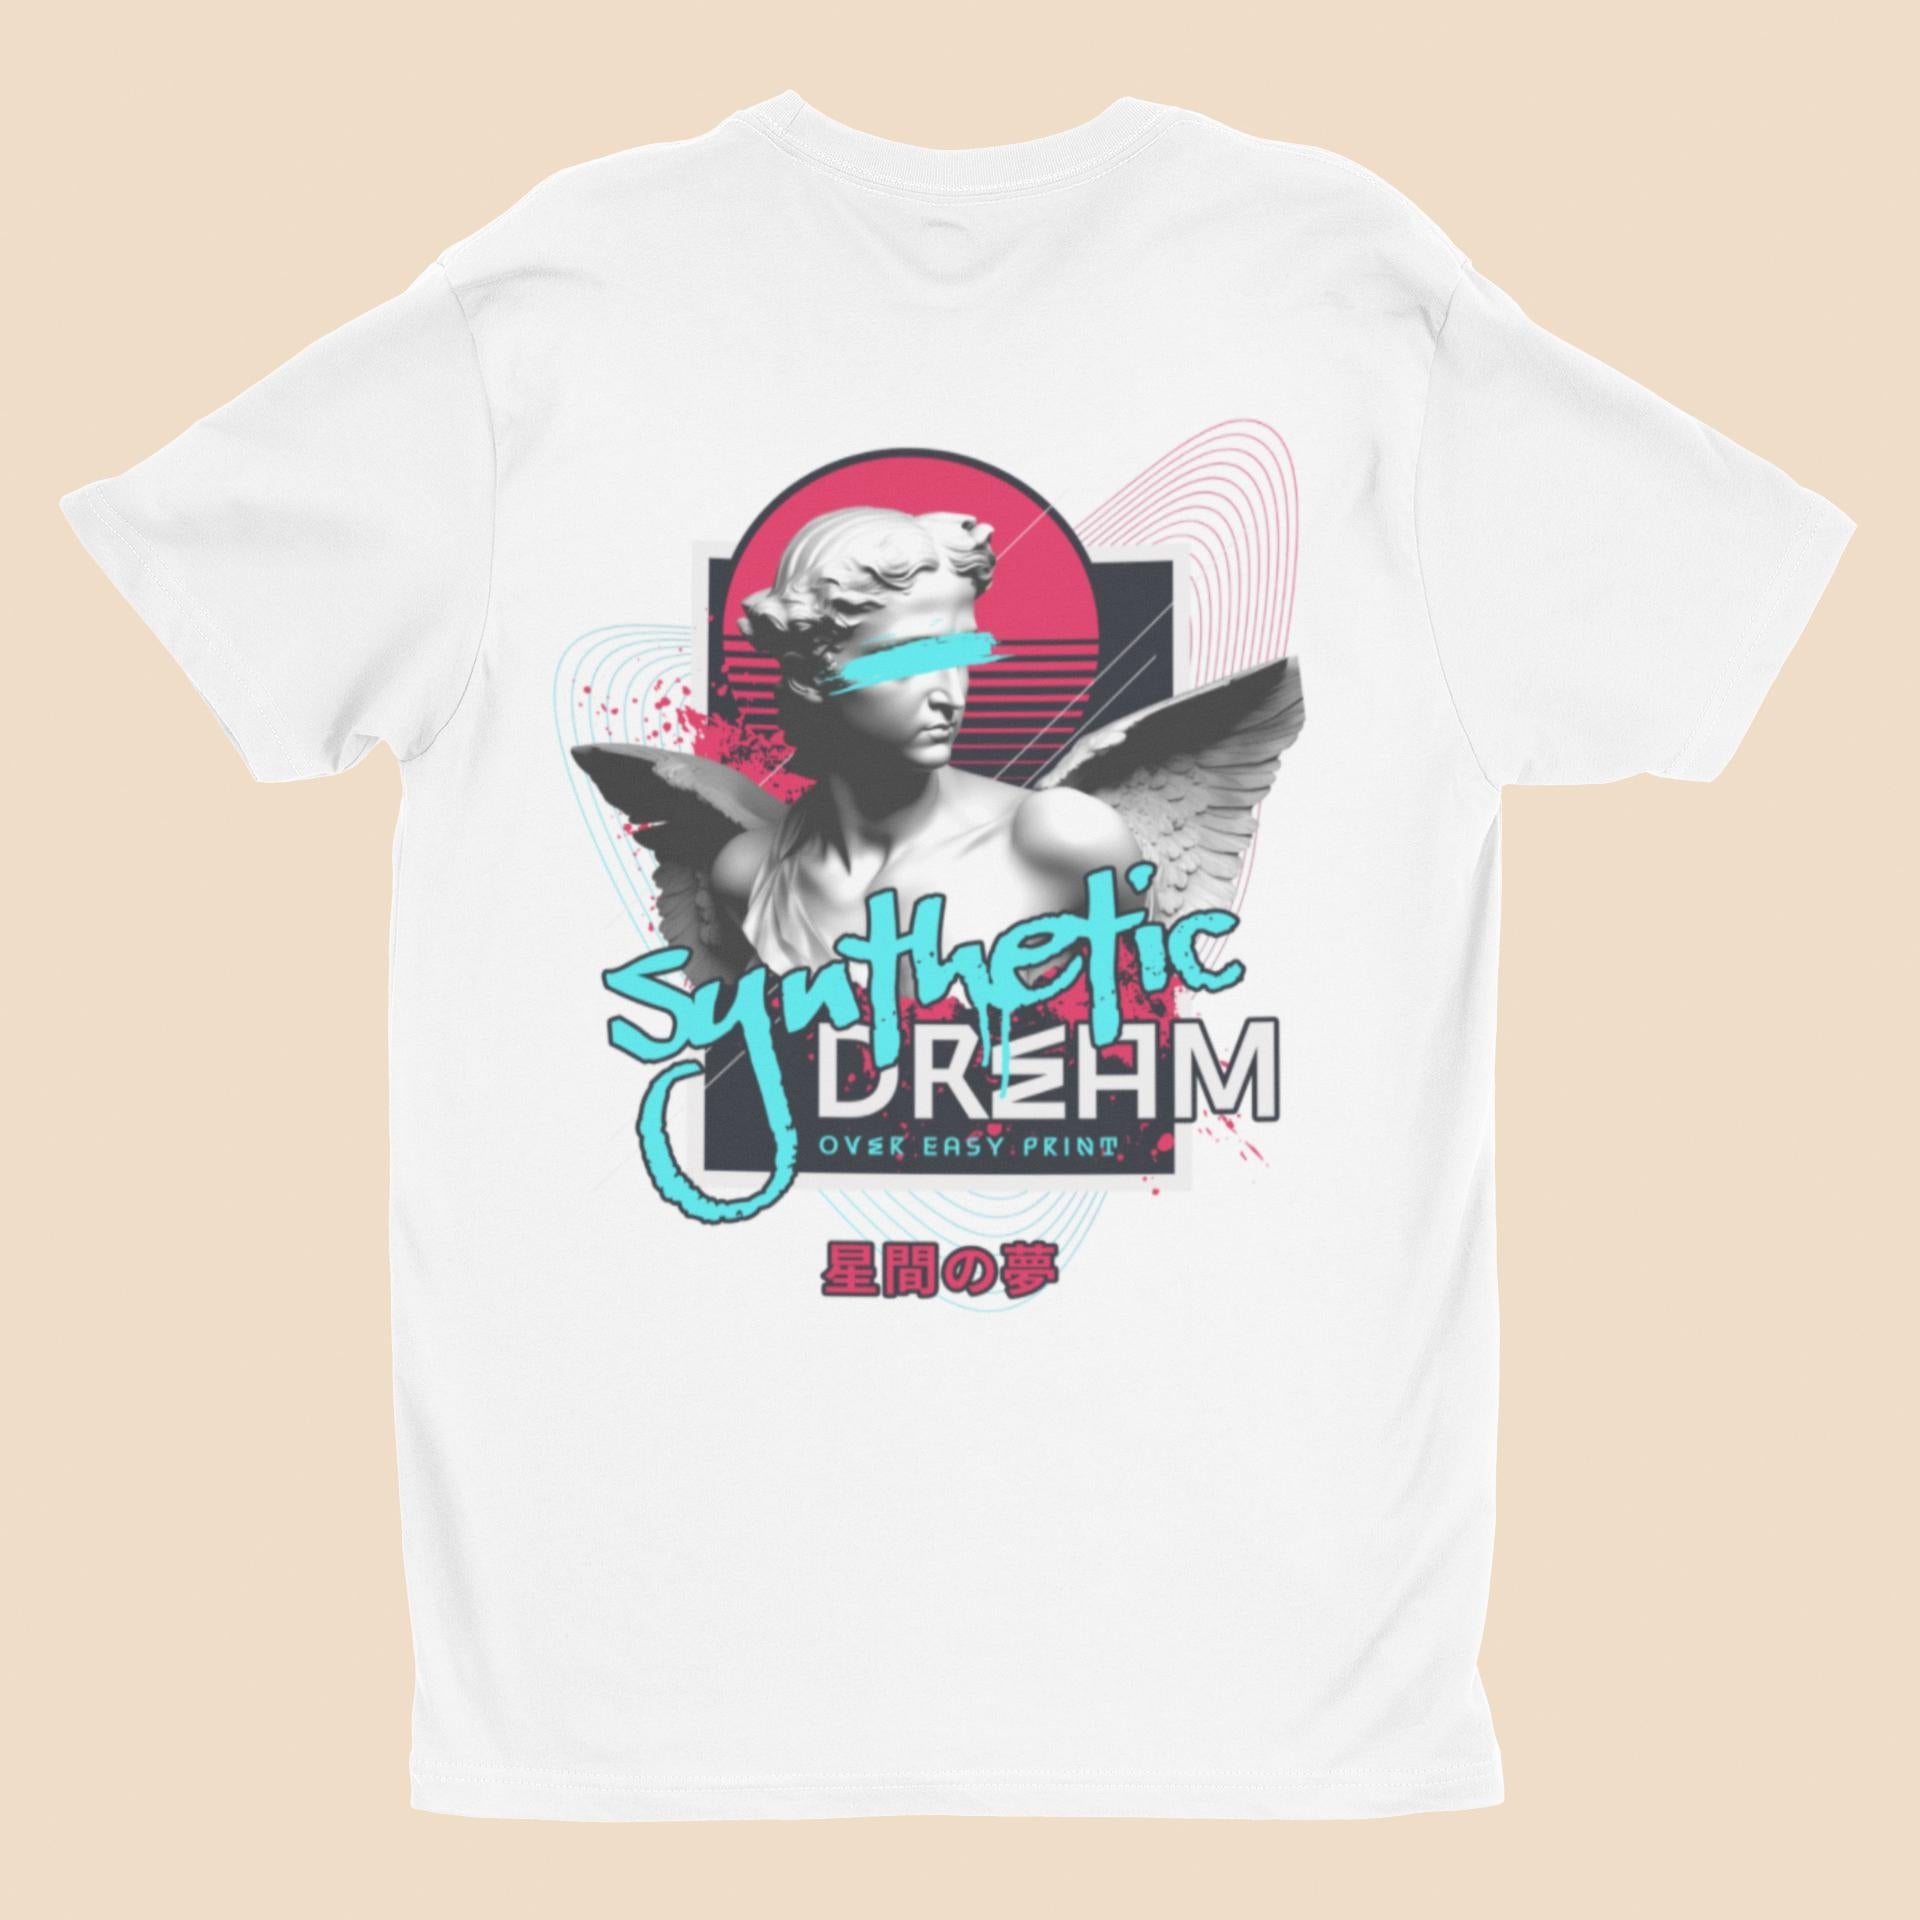 Synthetic Dream Statue T-Shirt